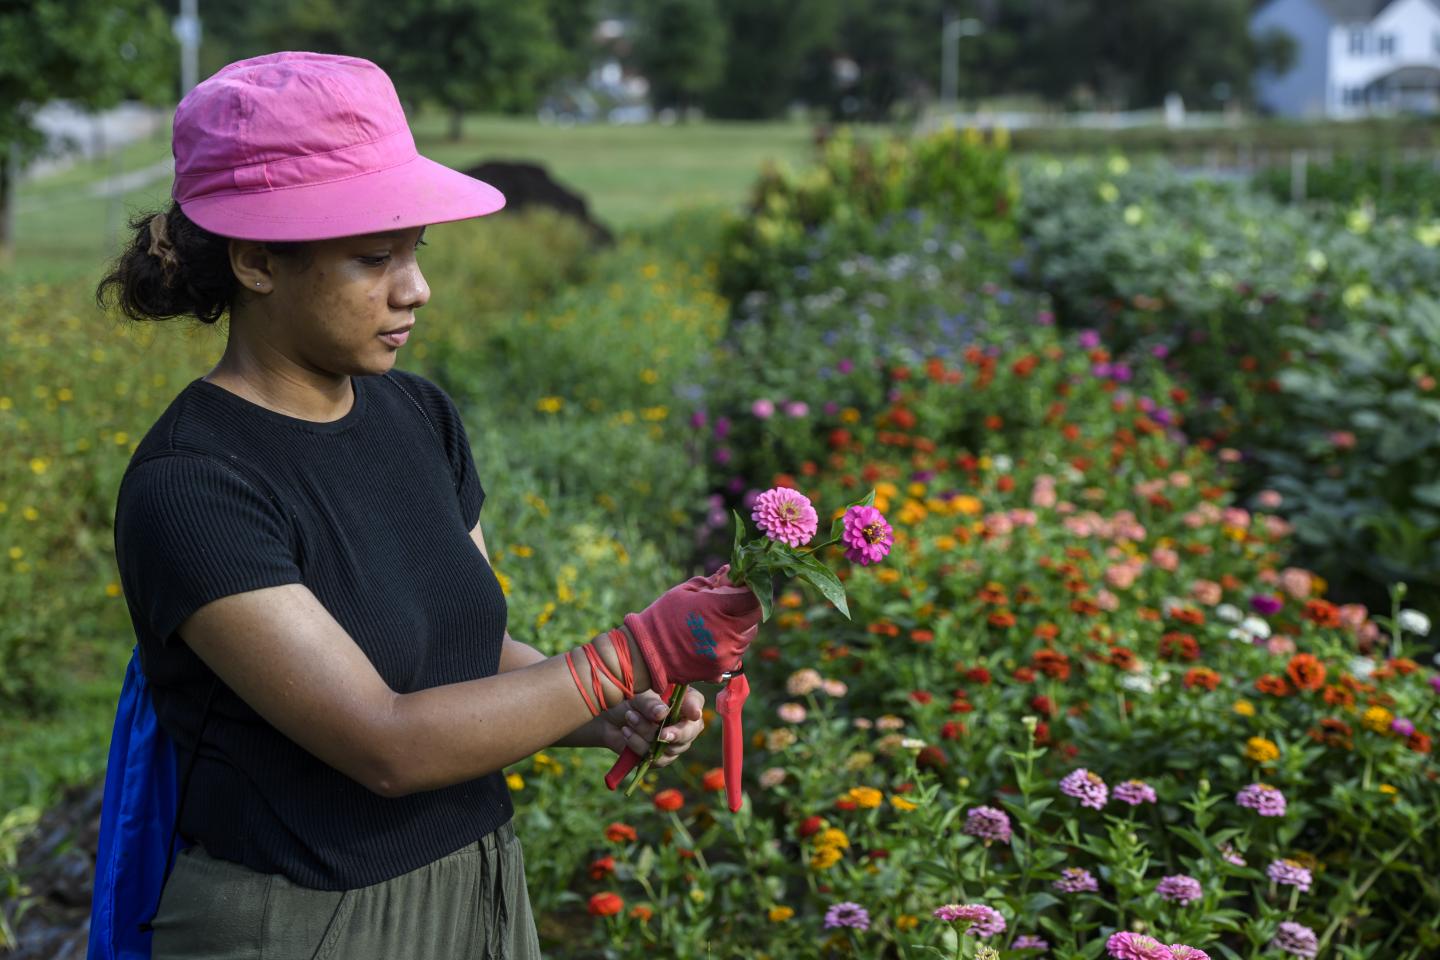 Wearing a pink hat and red gardening gloves, Johns Hopkins student Angelica Brooks prunes flowers